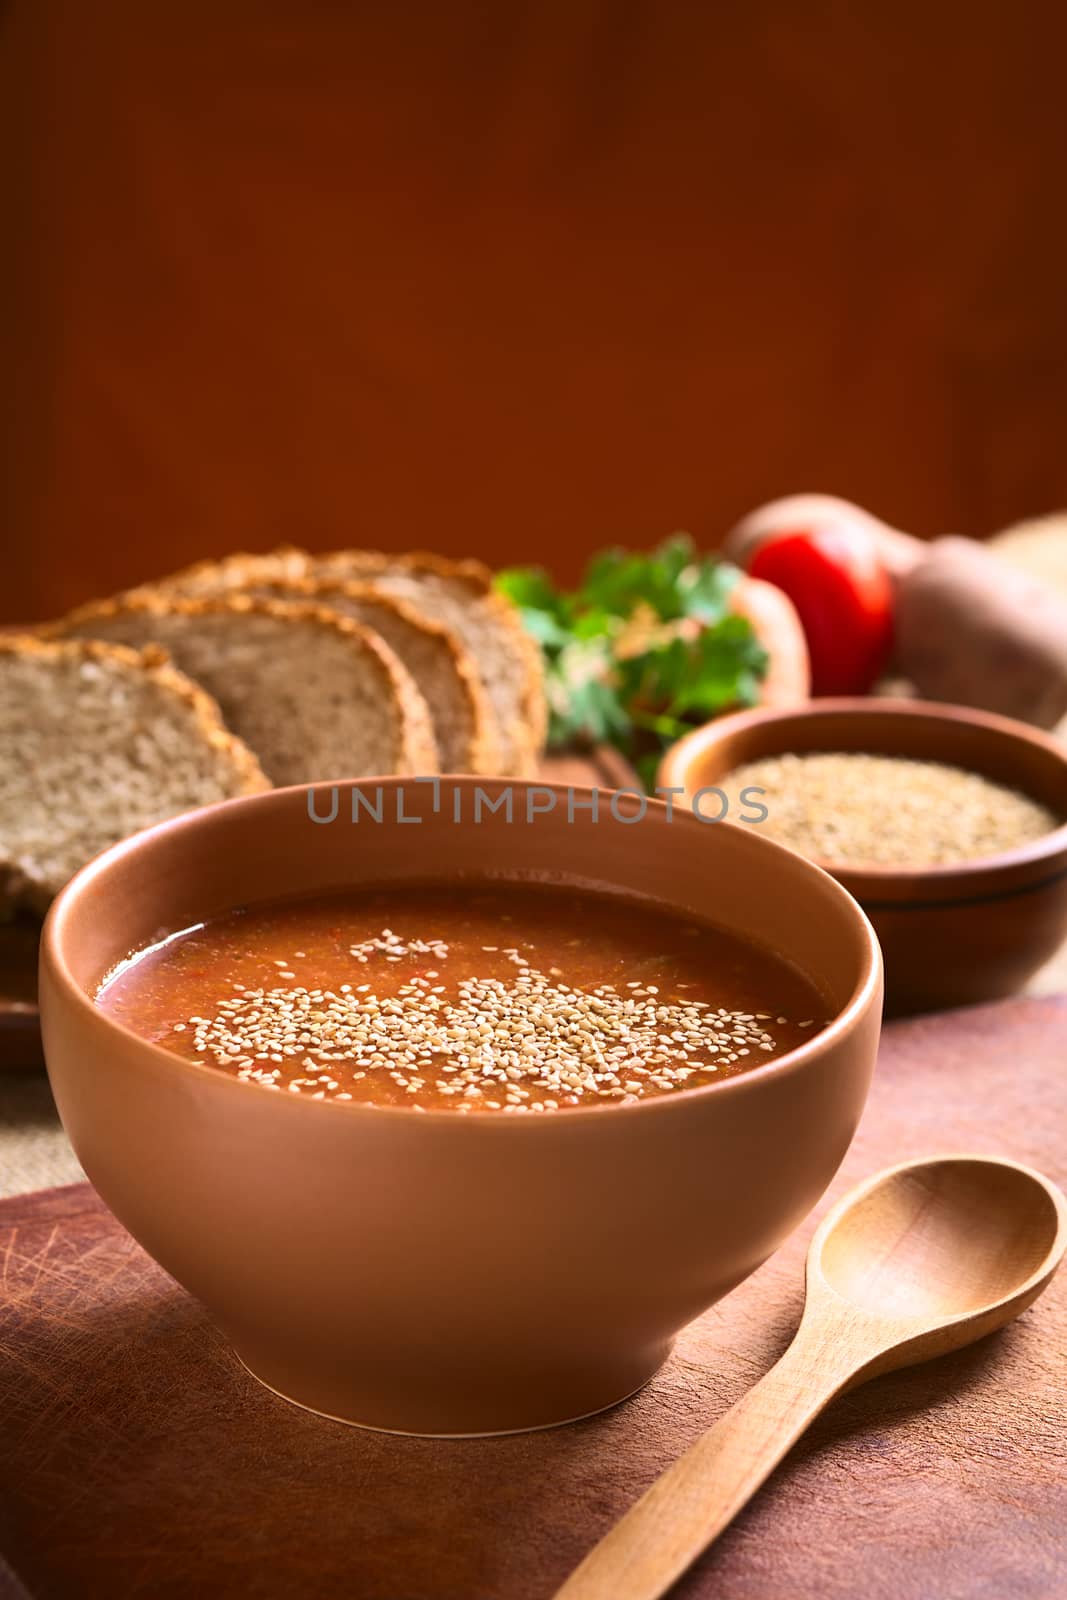 Cream of Vegetable Soup with Sesame Seeds by ildi